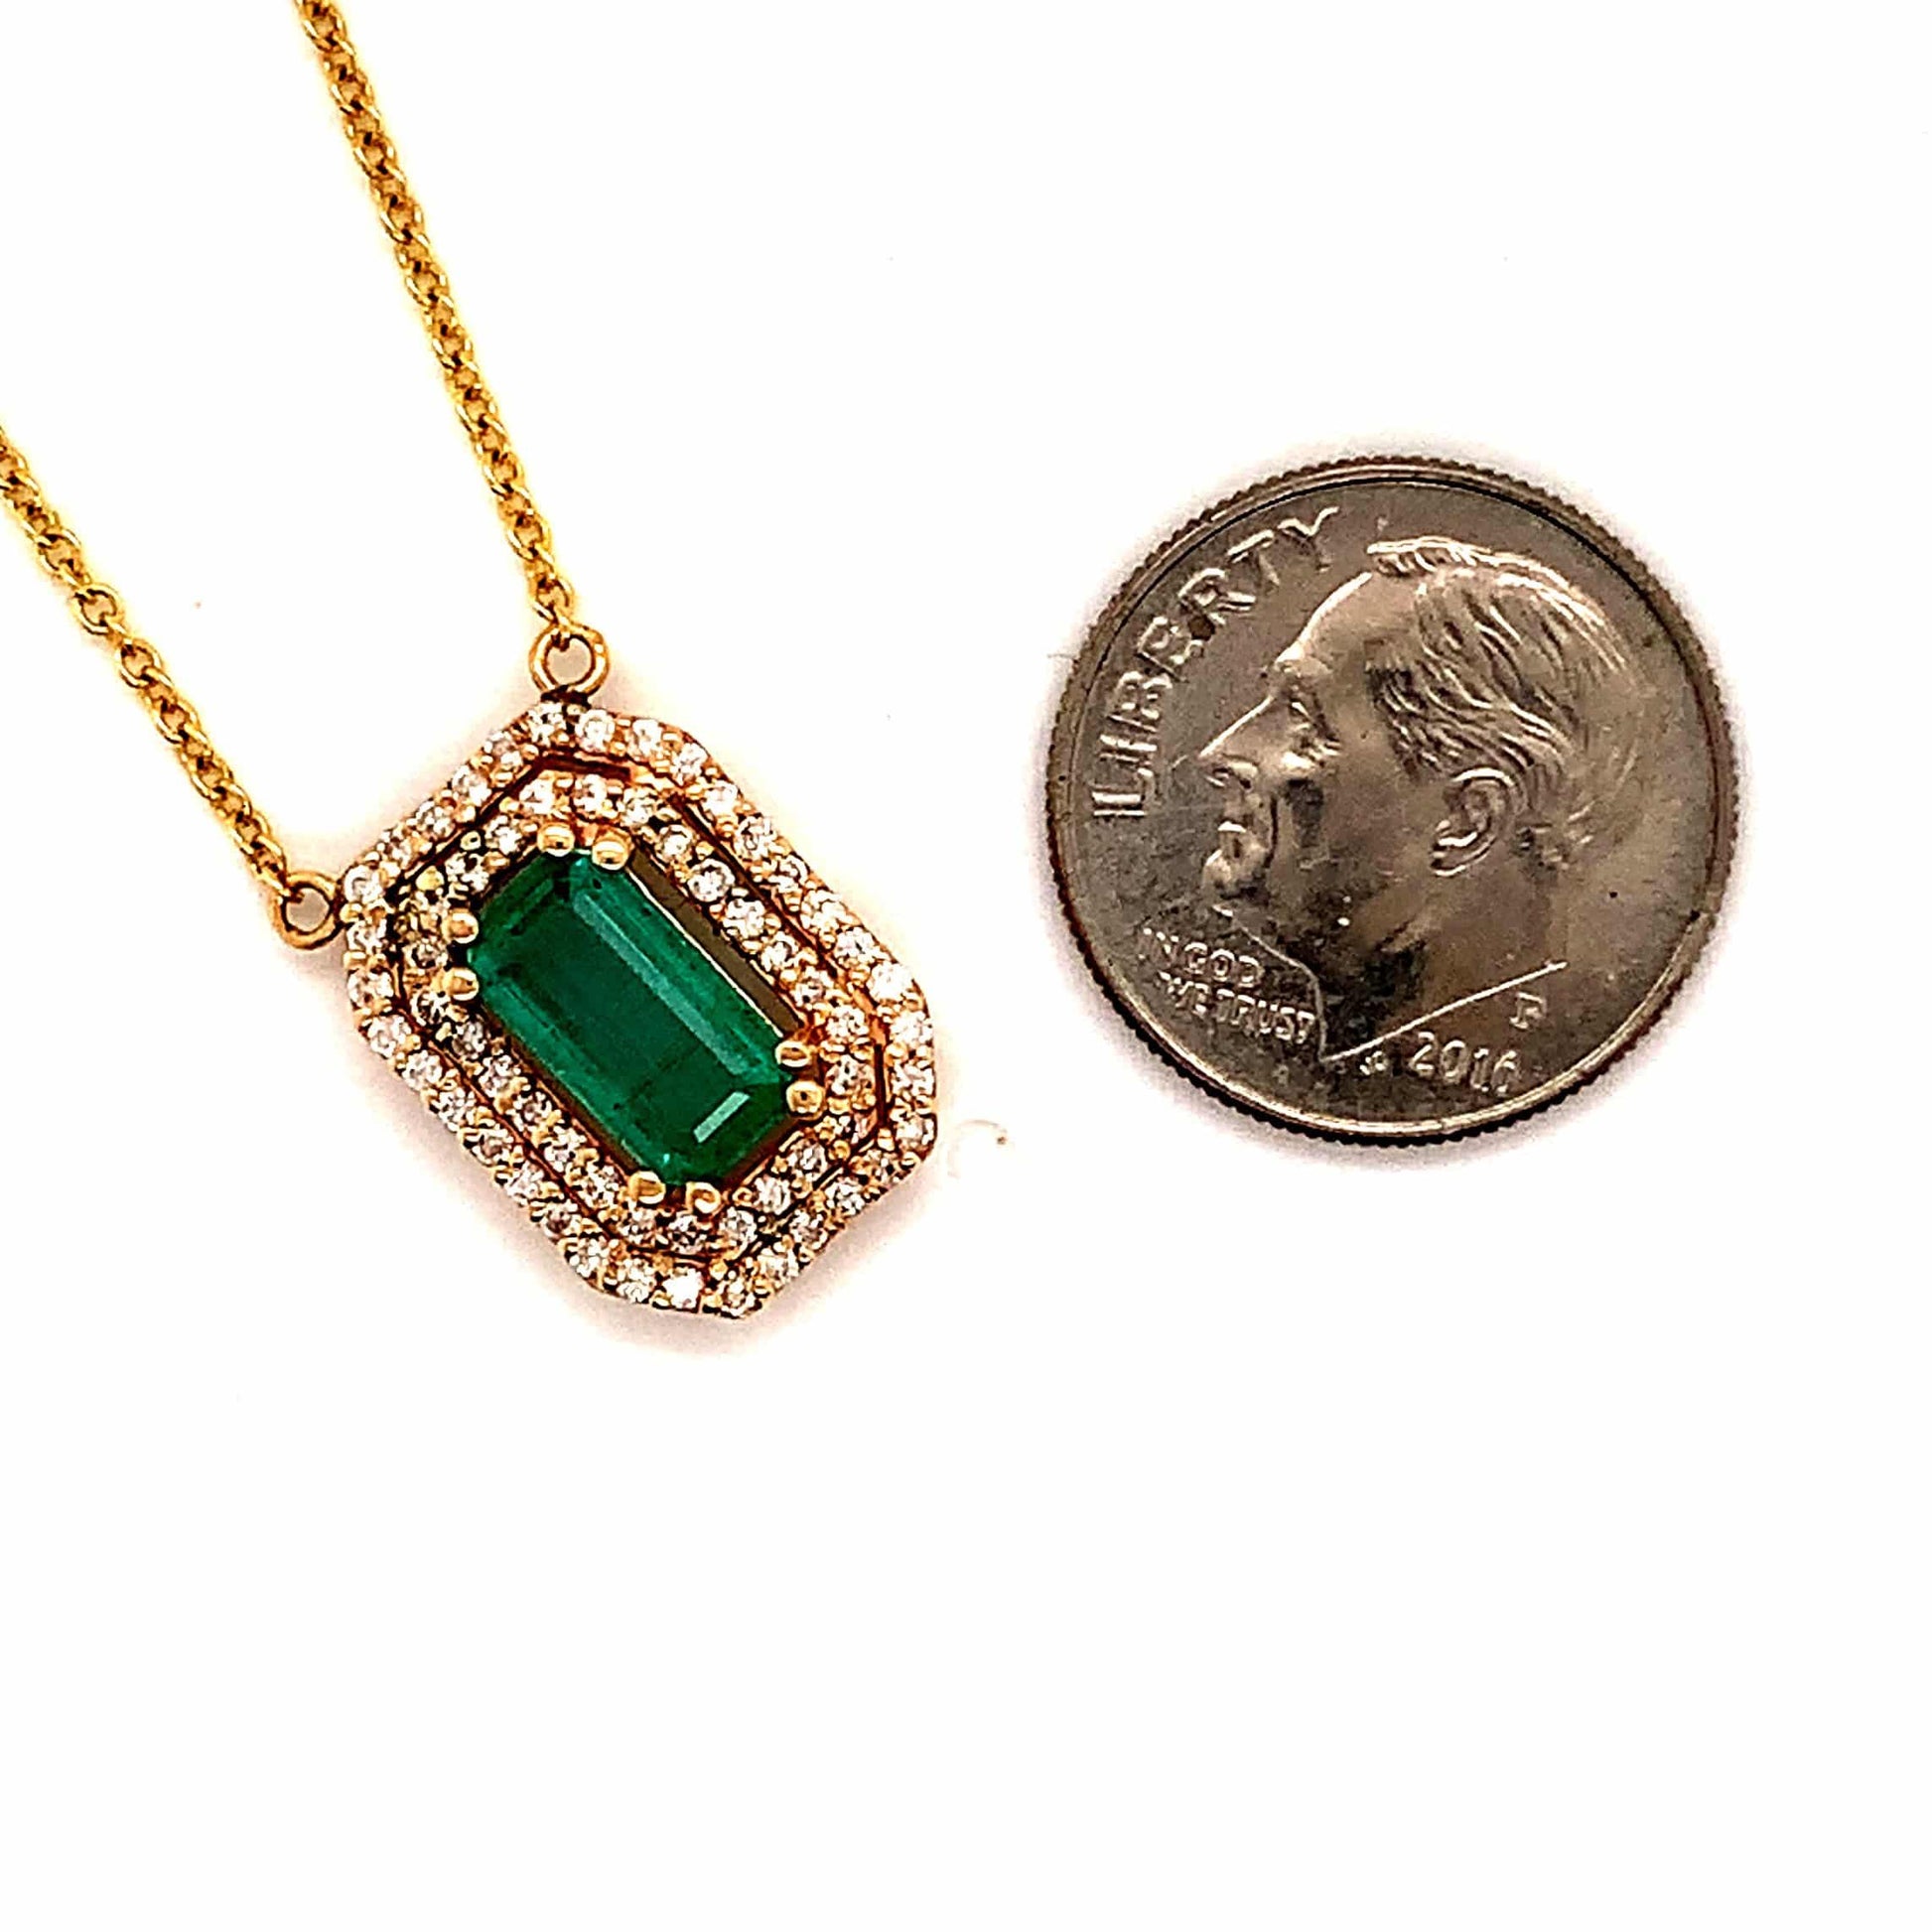 Natural Emerald Diamond Necklace 14k Gold 1.21 TCW 16" Certified $4,950 112176 - Certified Estate Jewelry